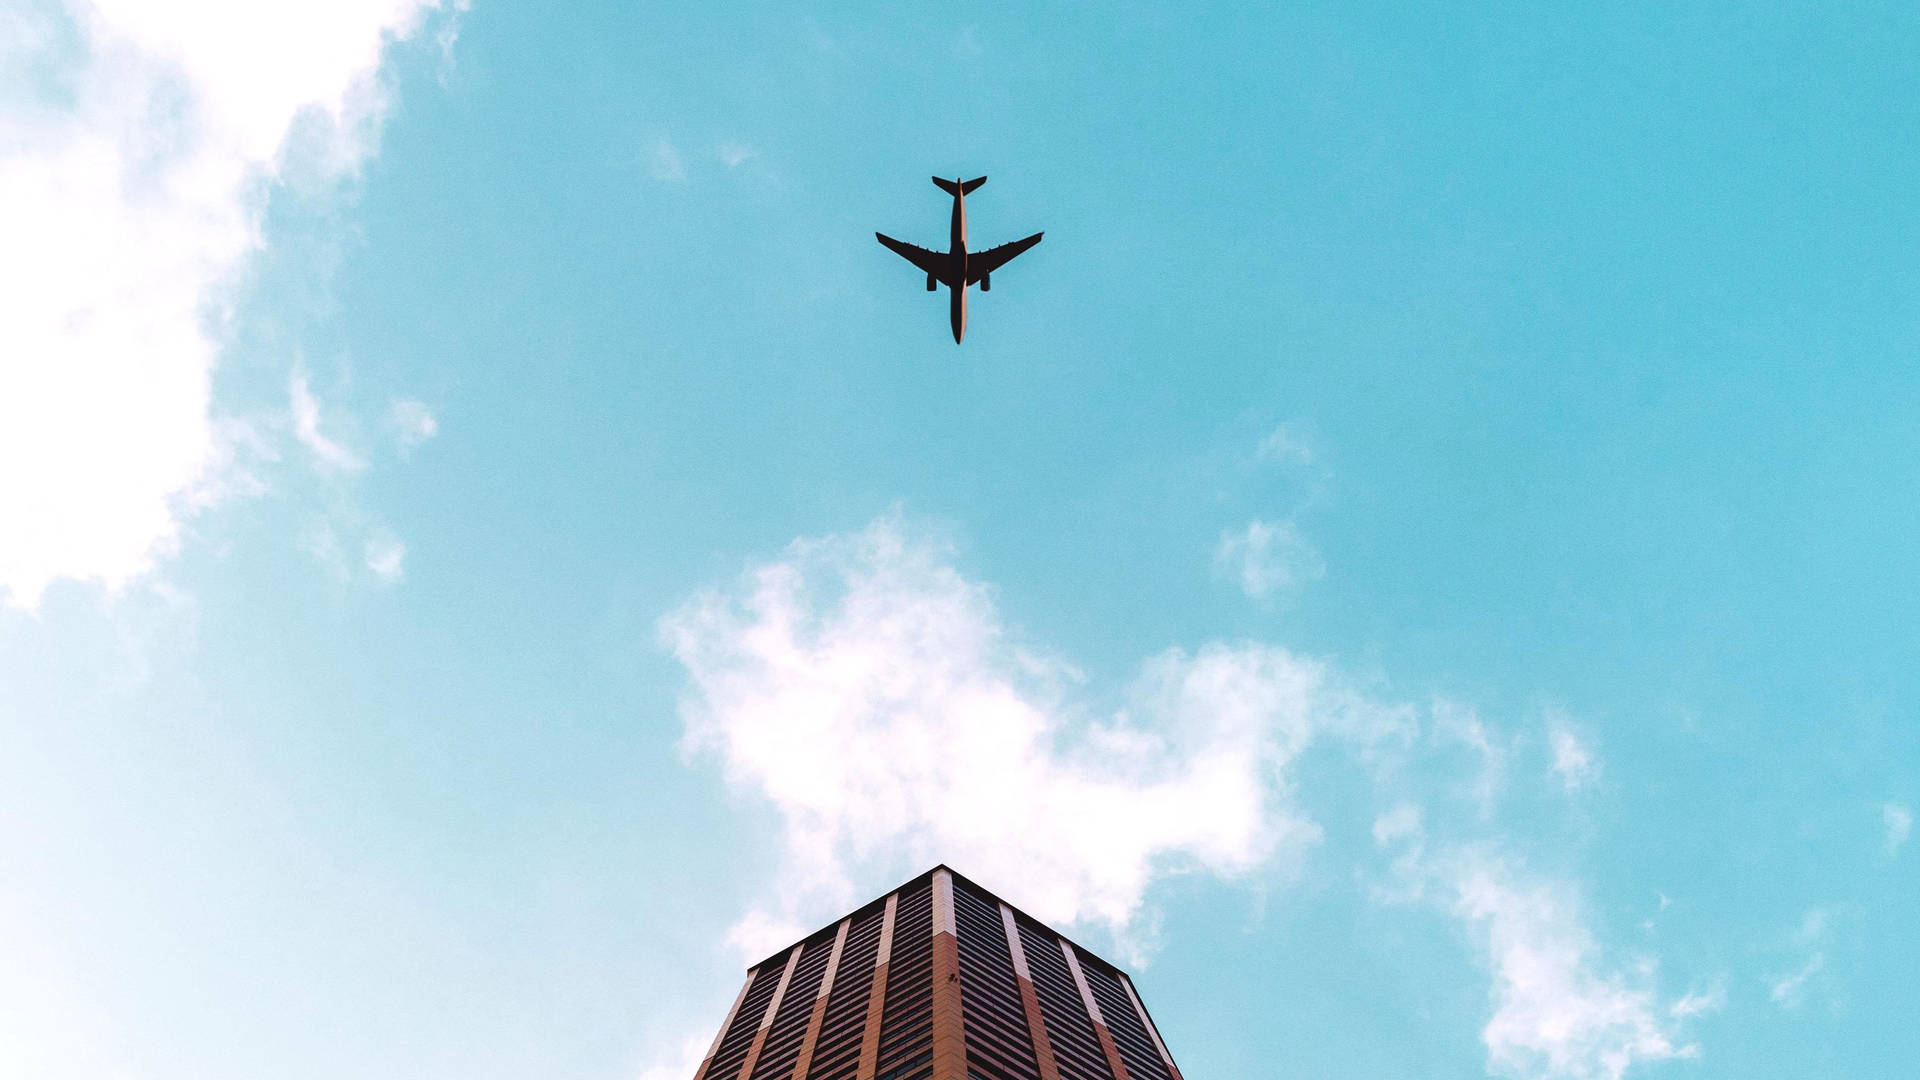 Hd Plane Flying Over Building Background